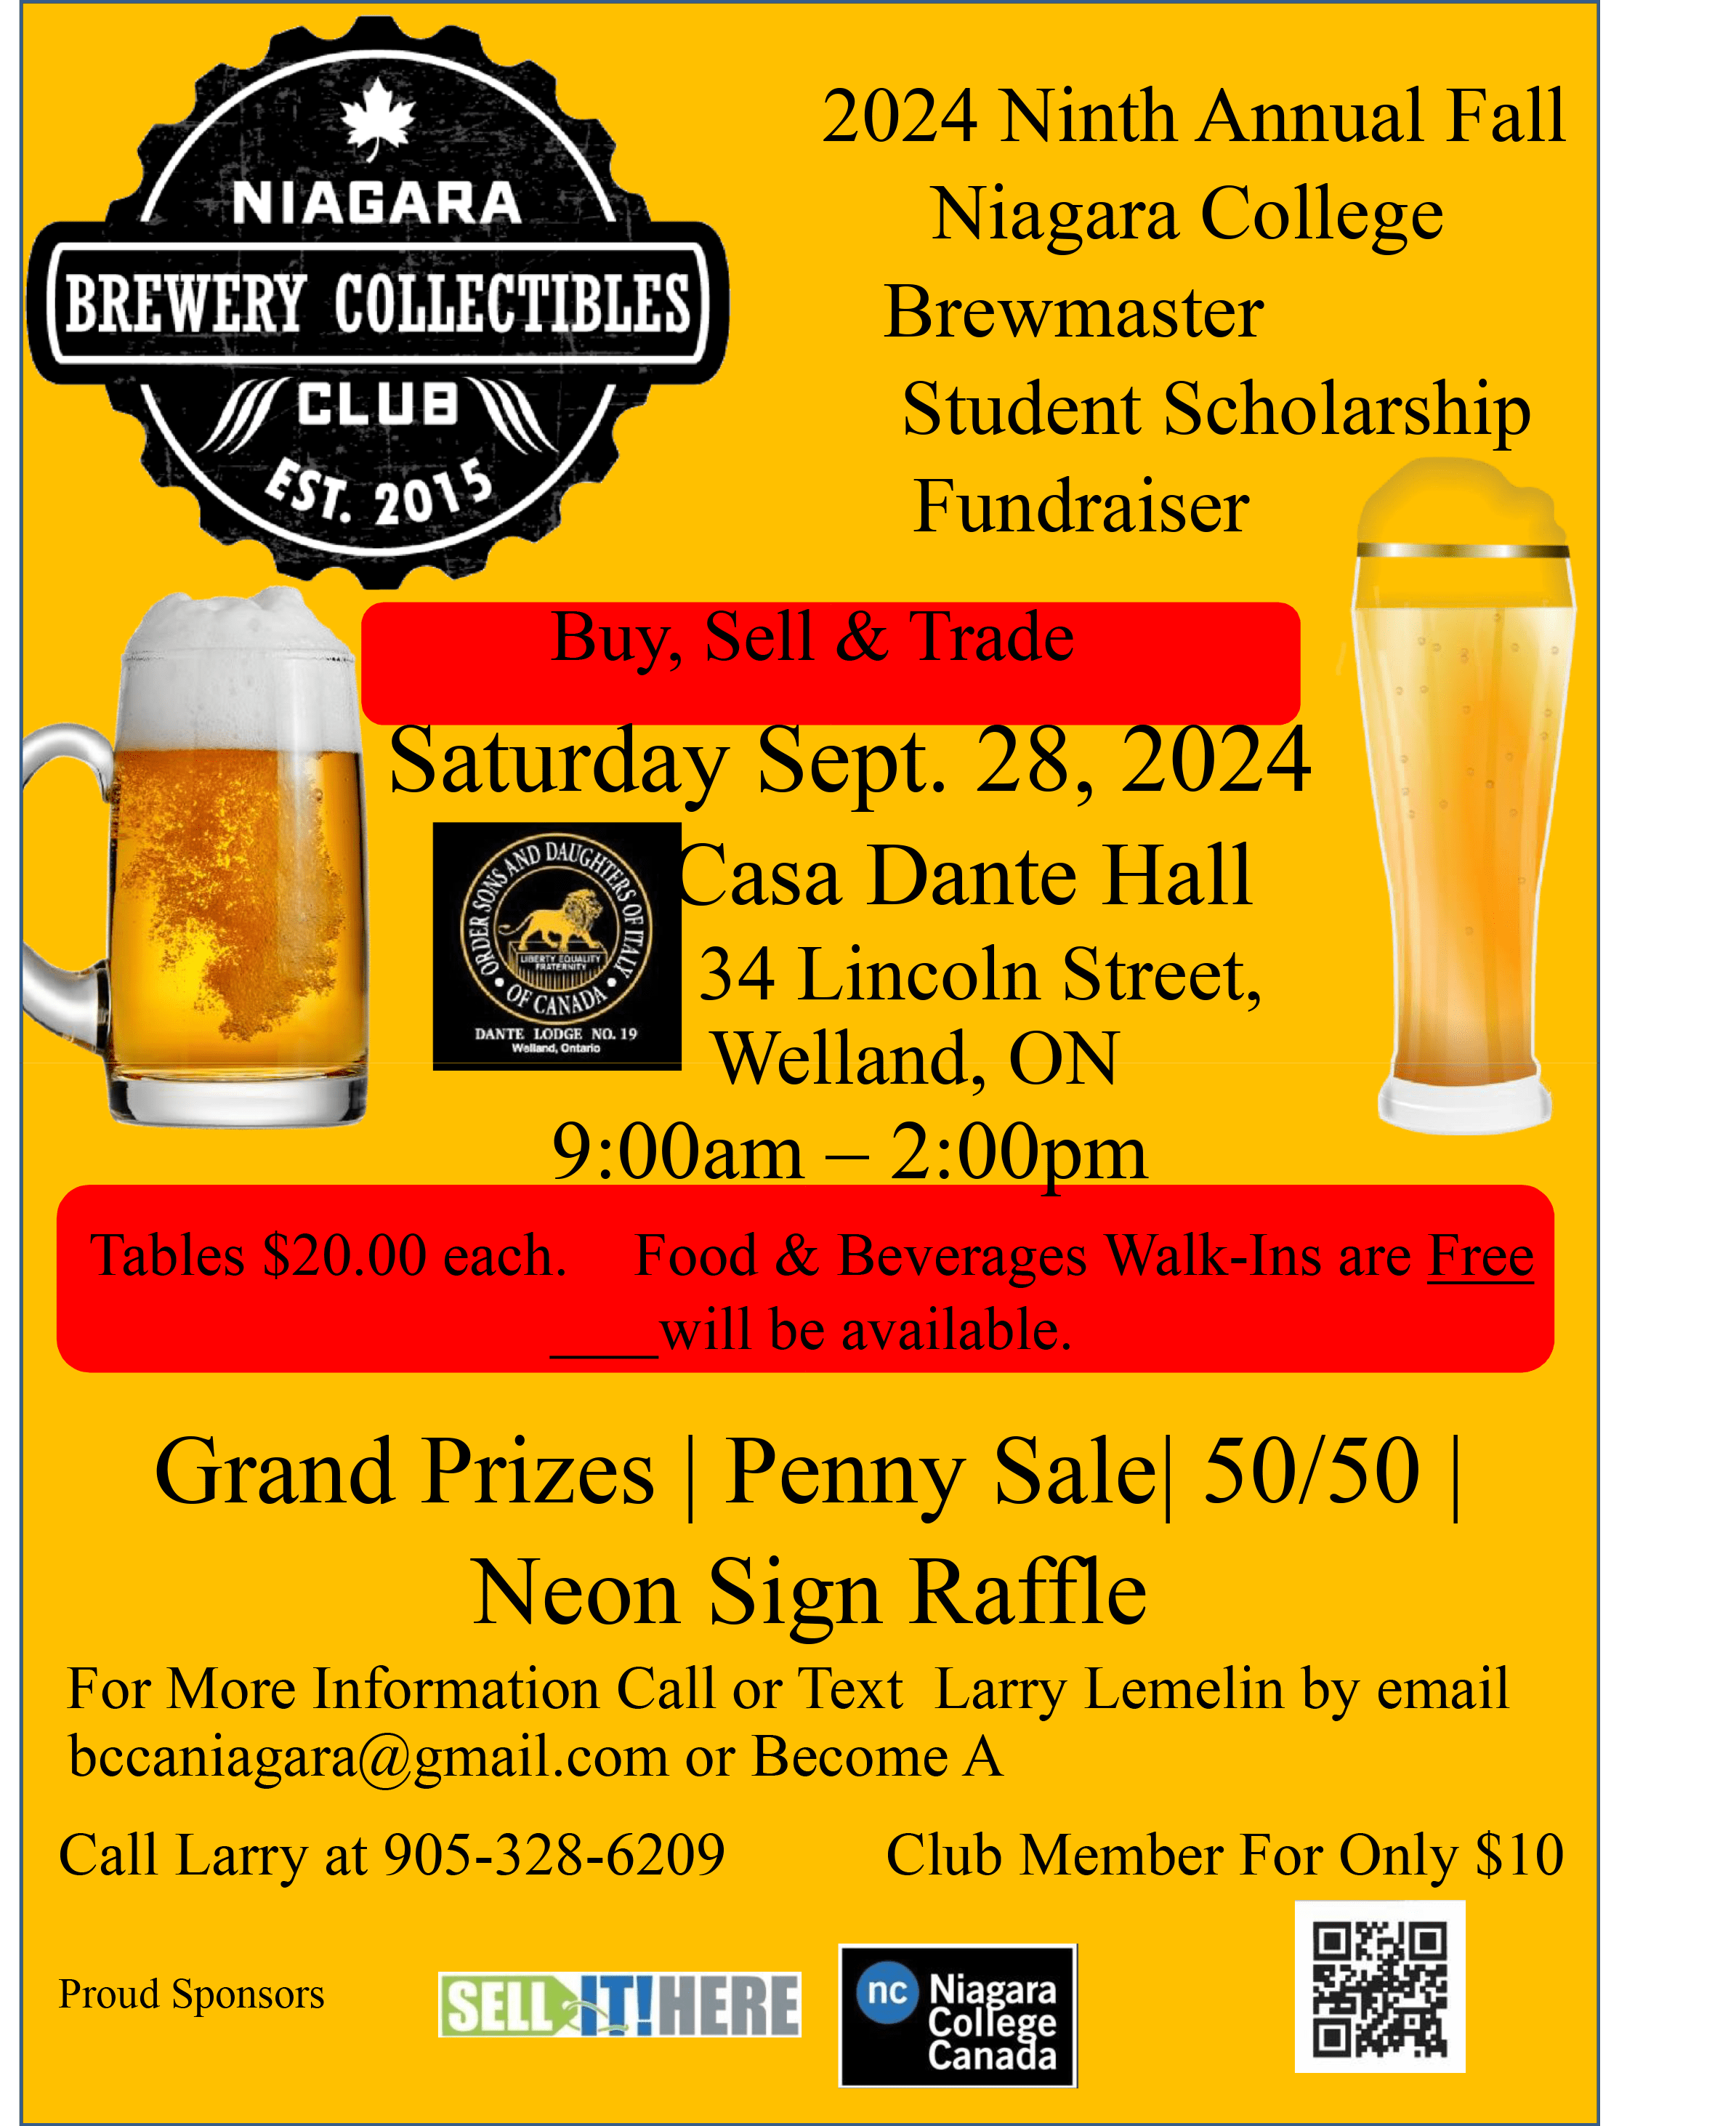 Fall beer collectibles Trade Show